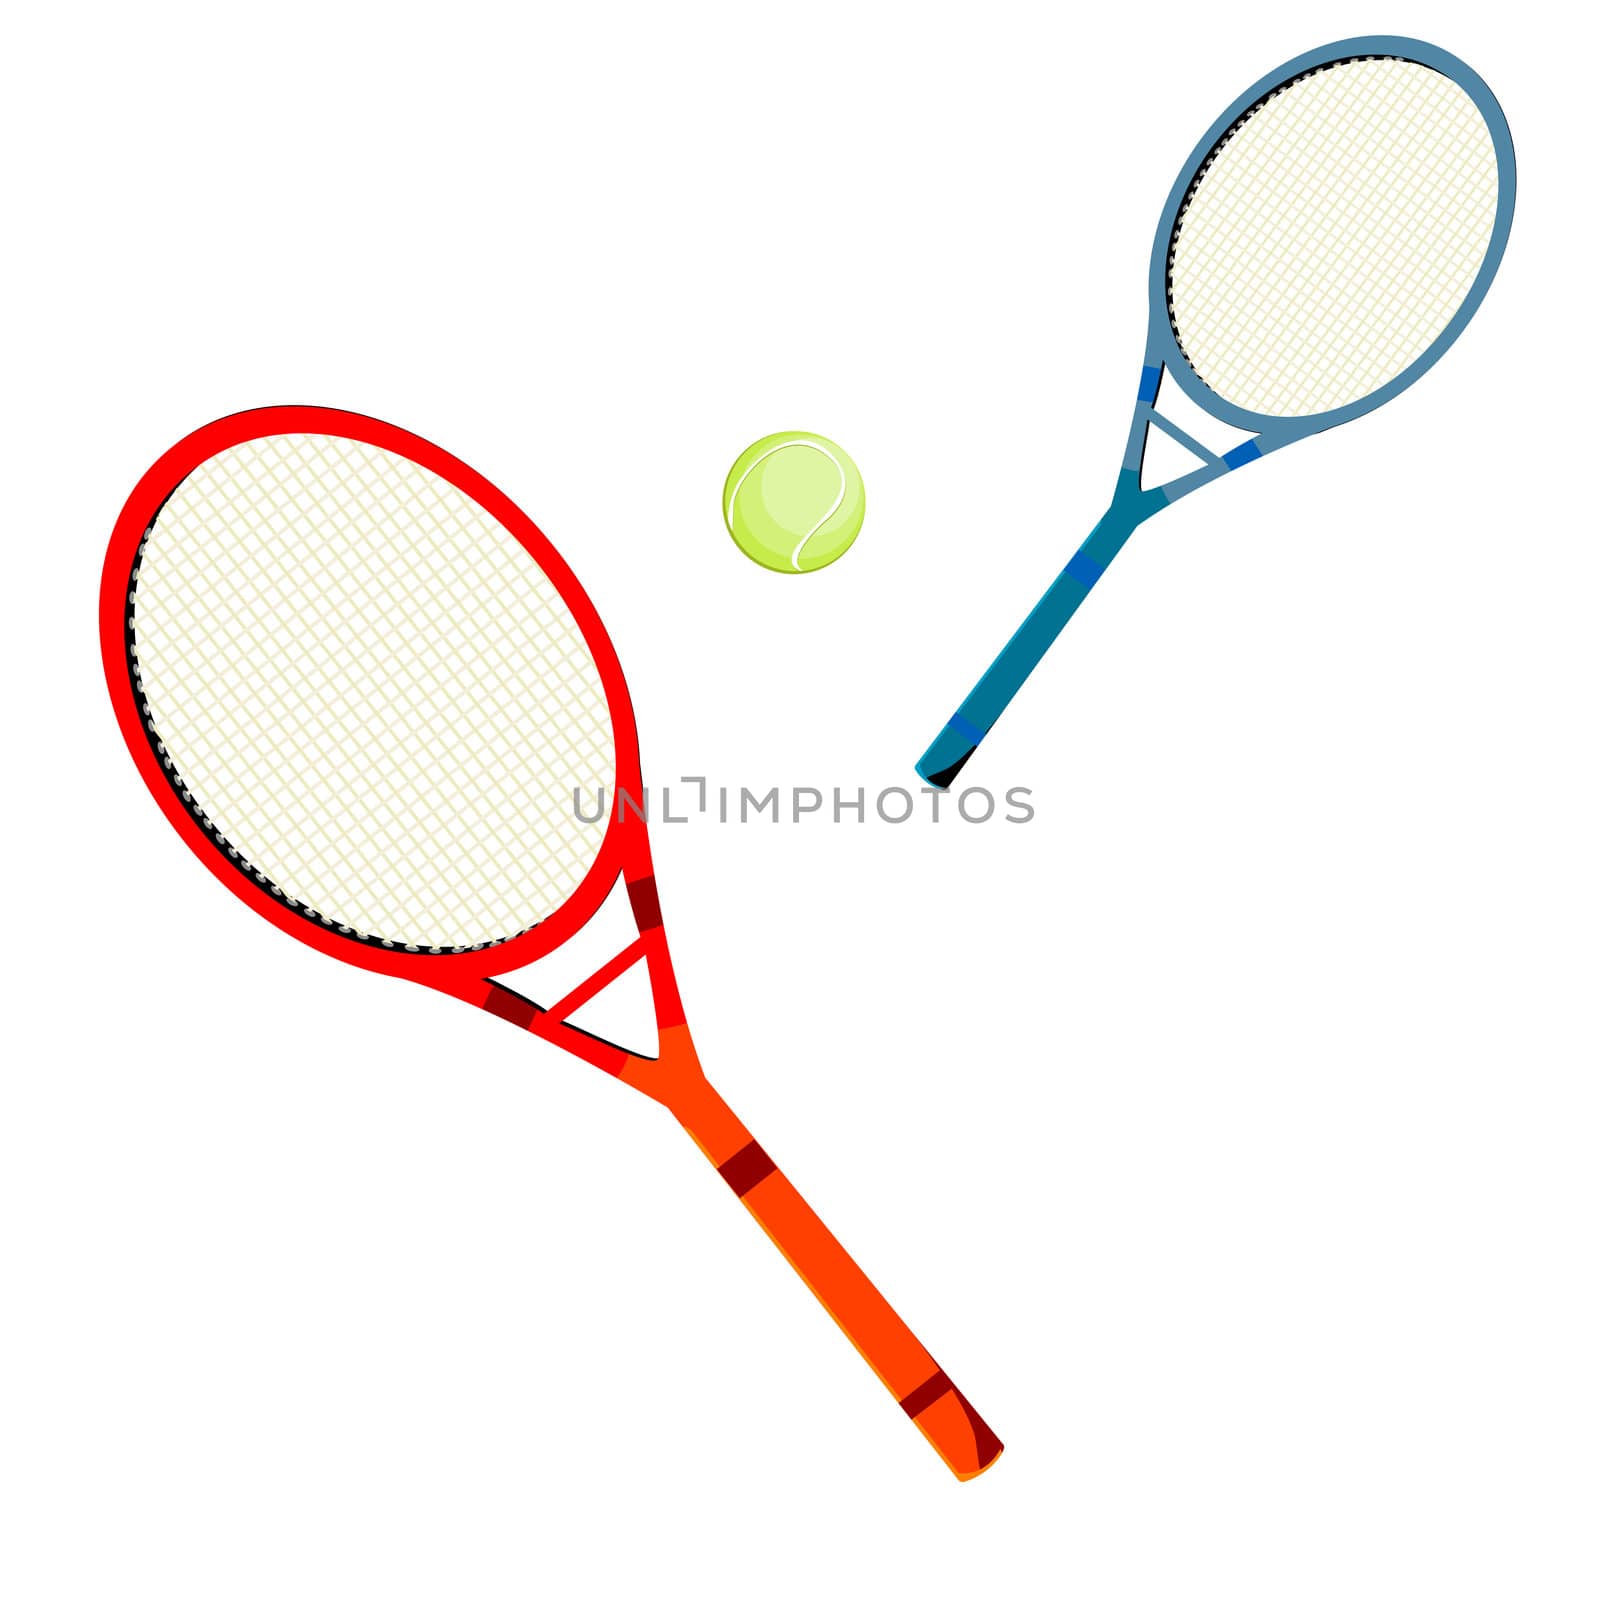 Tennis rackets and ball over white background